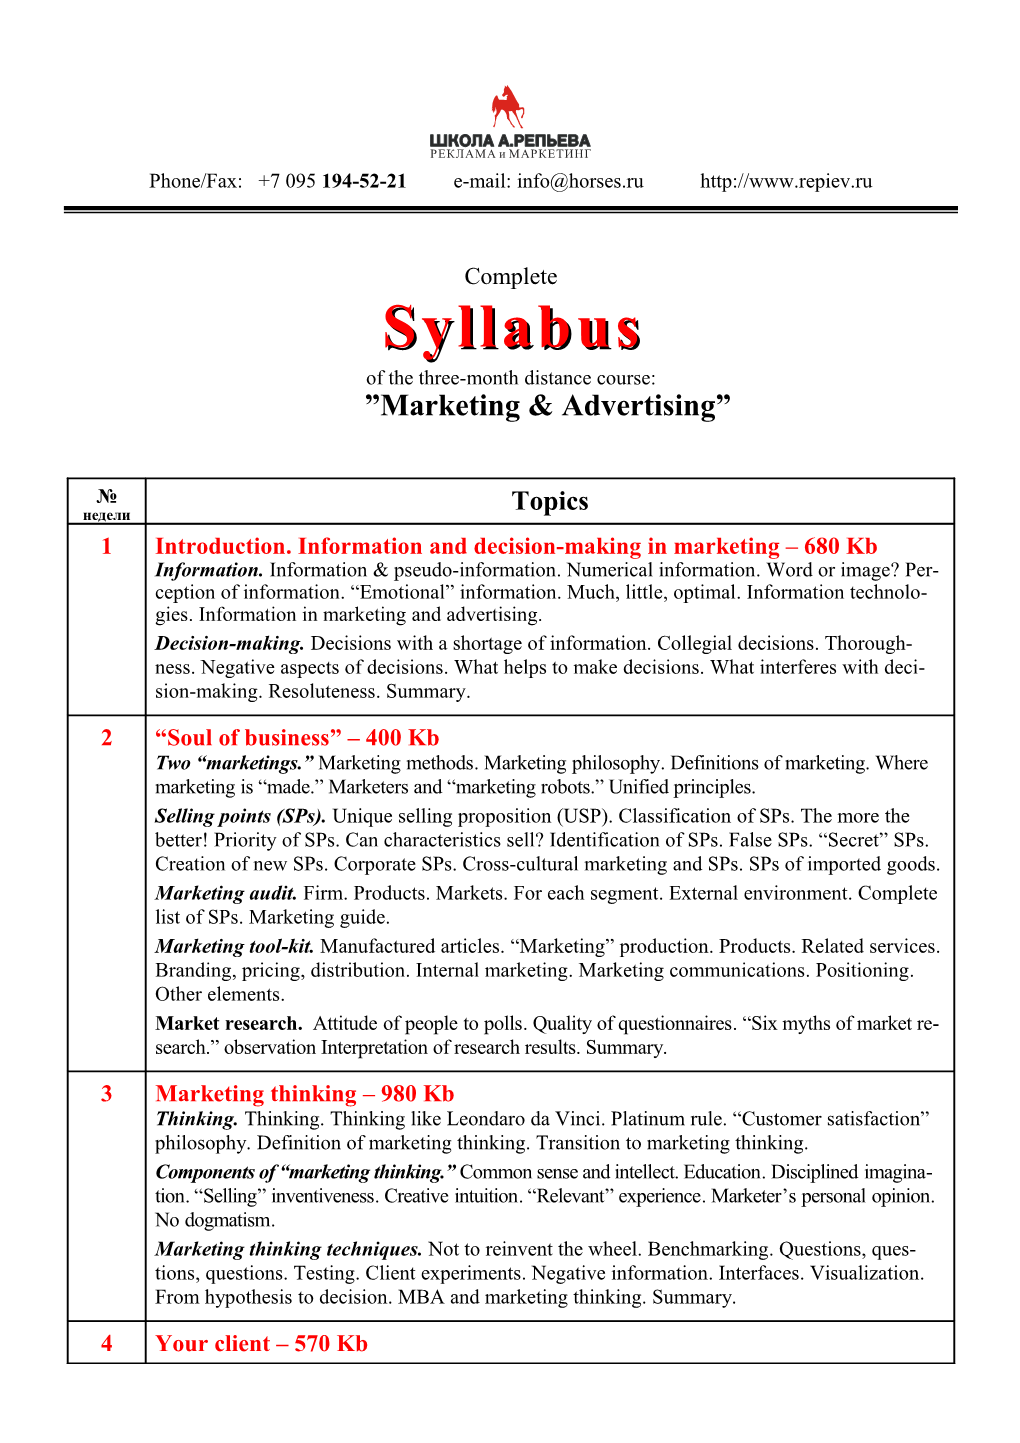 Of the Three-Month Distance Course: Marketing & Advertising